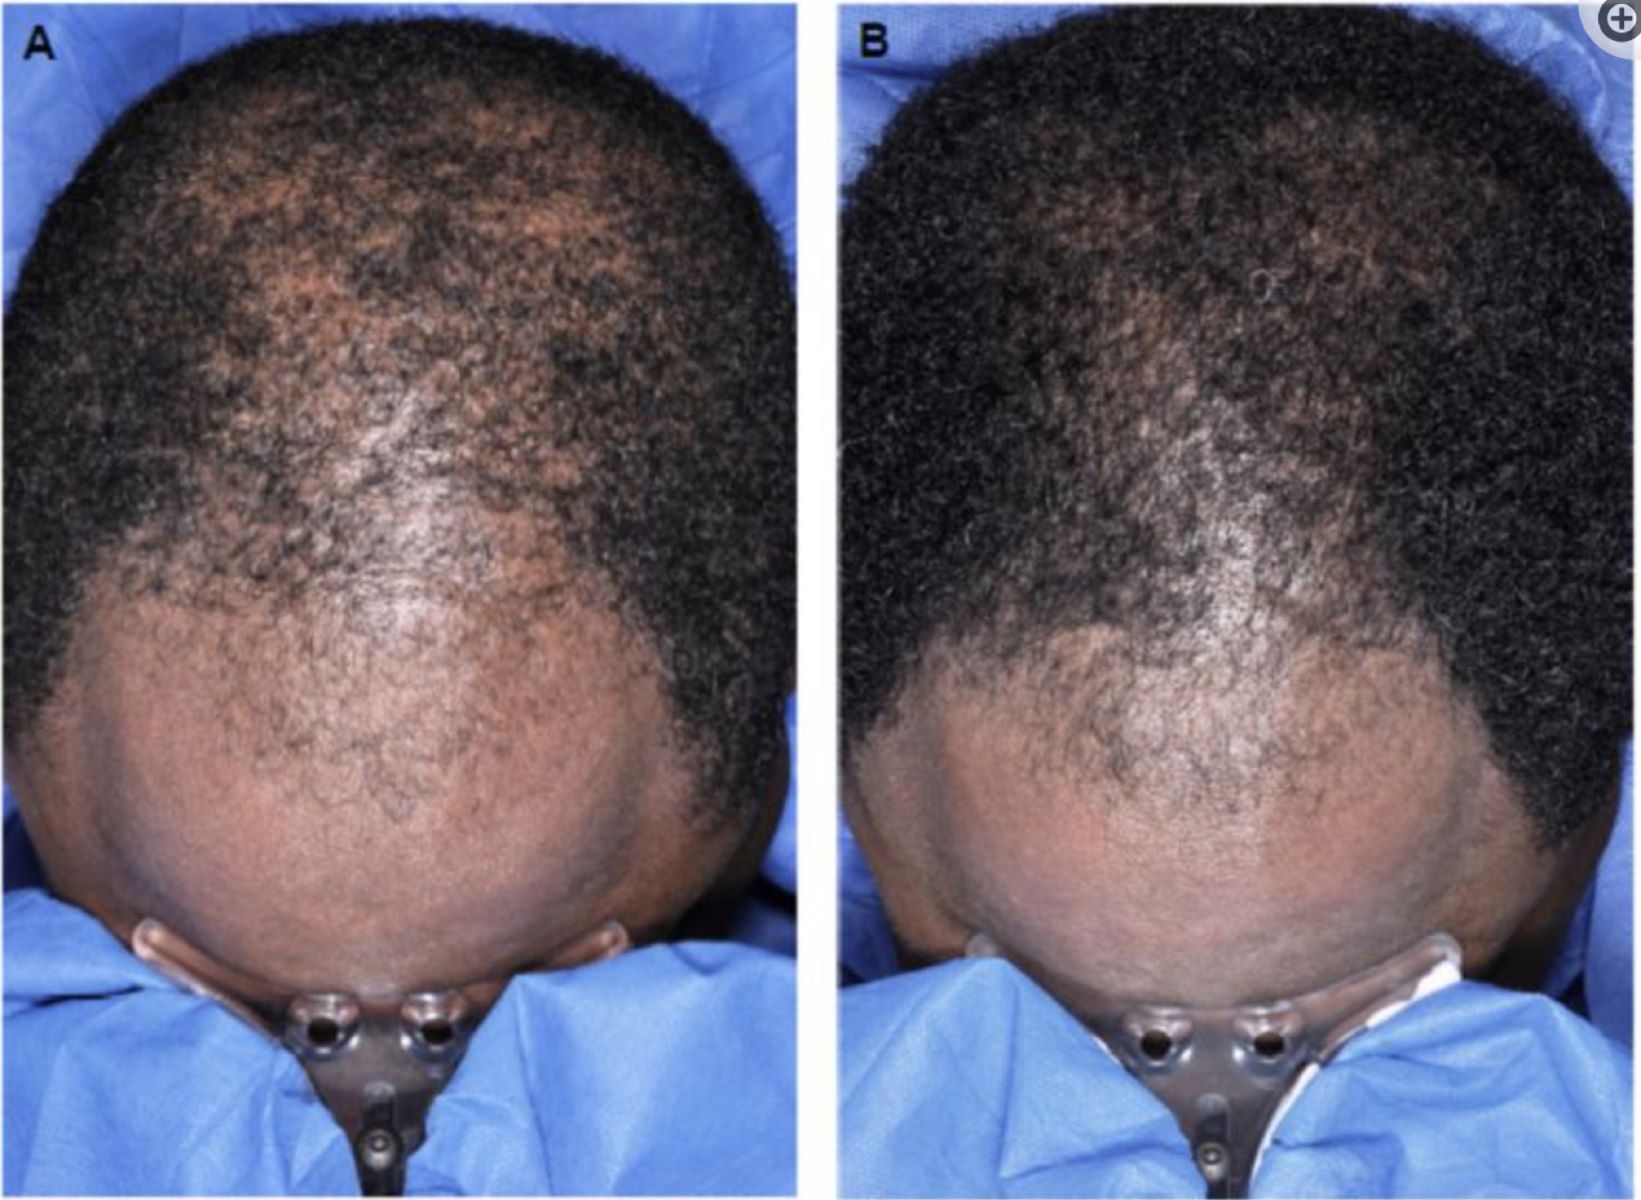 Topical Minoxidil and hair growth: clinical photos after using Minoxidil topical foam to treat male pattern baldness for 8 weeks